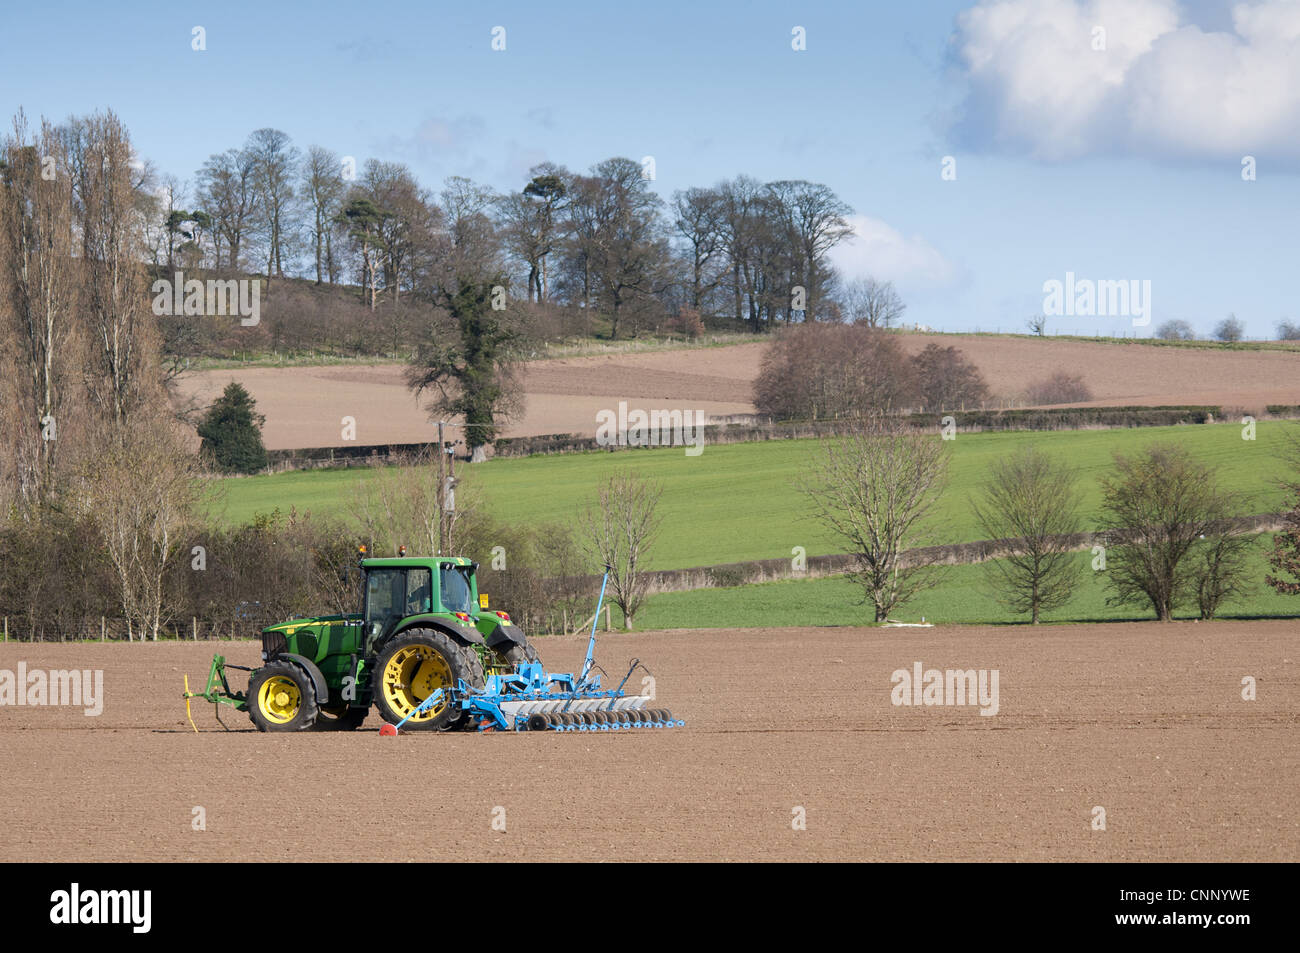 John Deere tractor with seed drill, drilling sugar beet, Nesscliffe, Shropshire, England, march Stock Photo